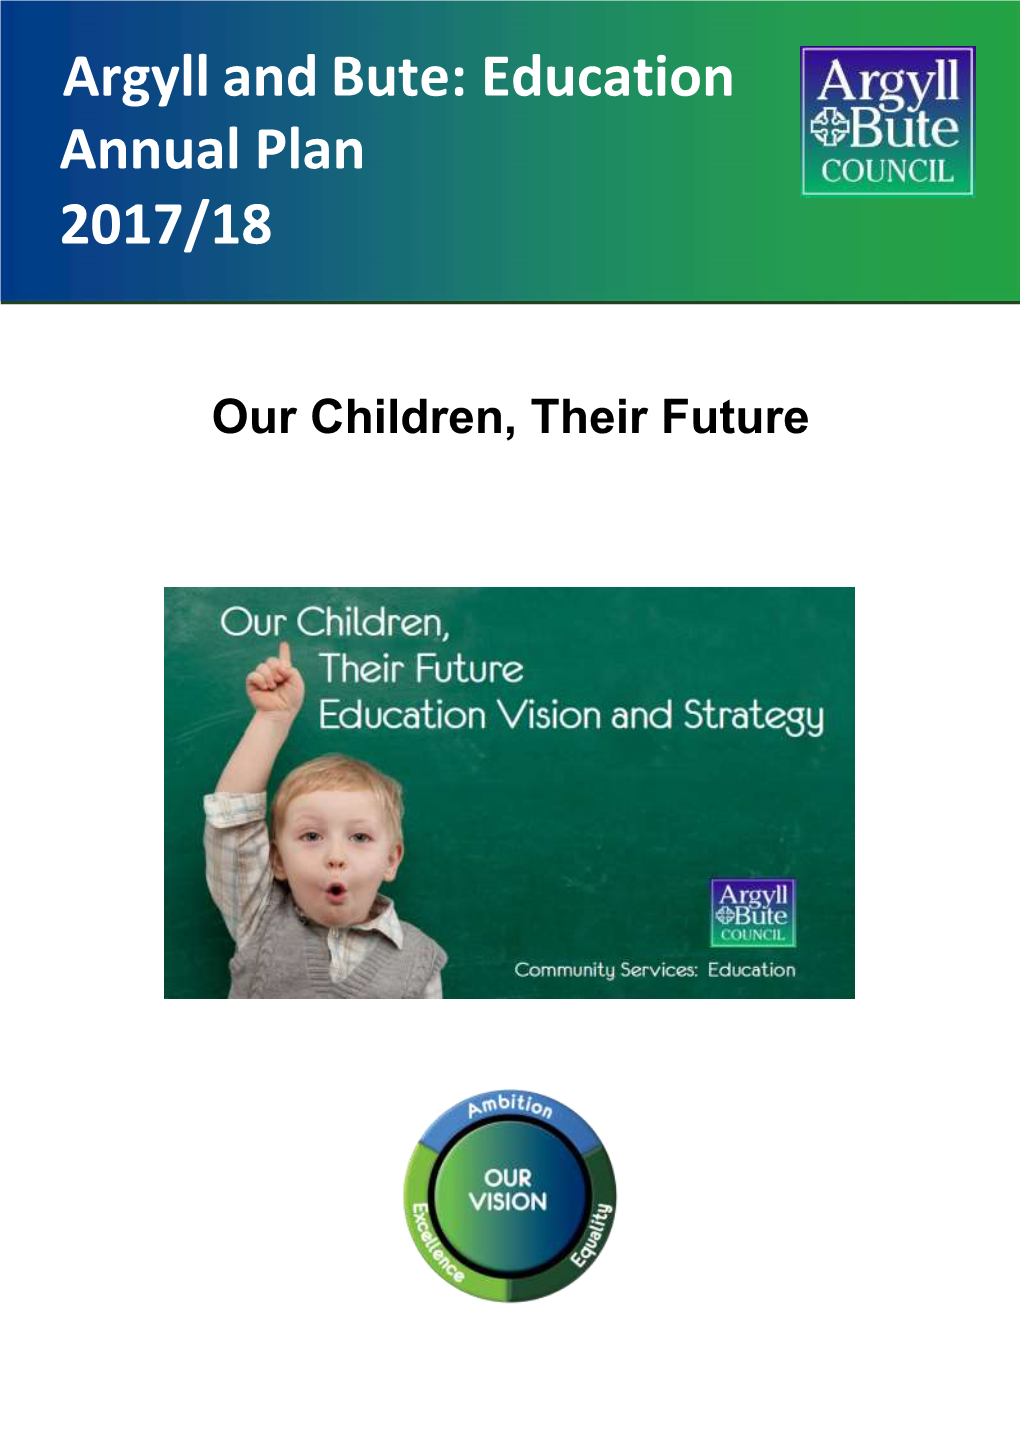 Argyll and Bute: Education Annual Plan 2017/18